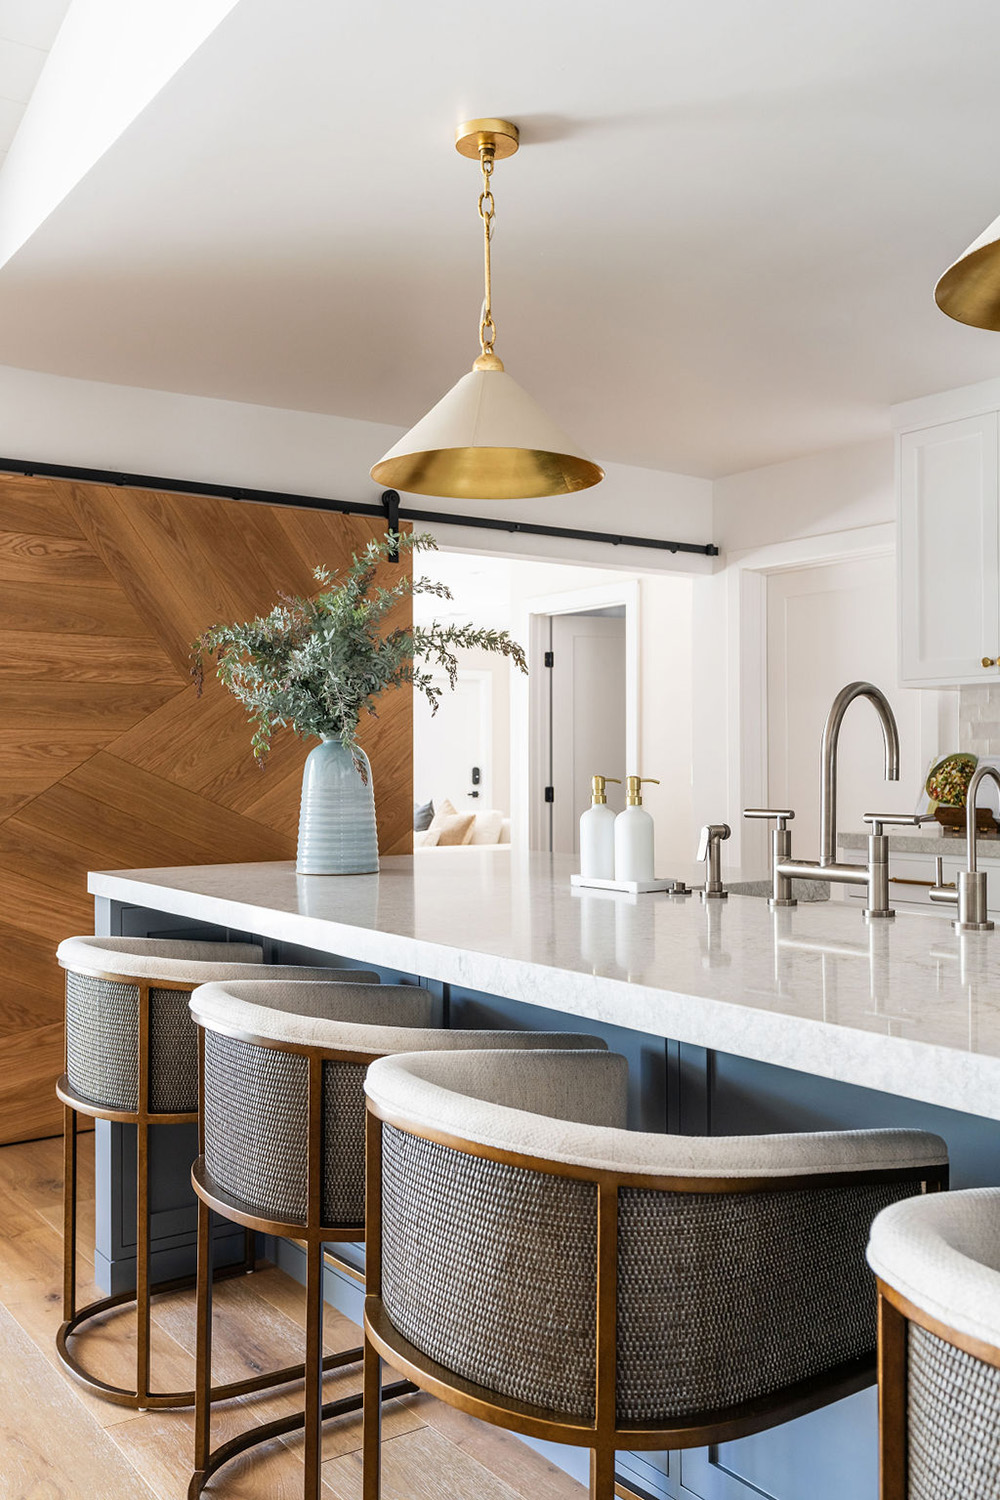 bright modern kitchen design with blue island, barrel style chairs and cone light fixtures